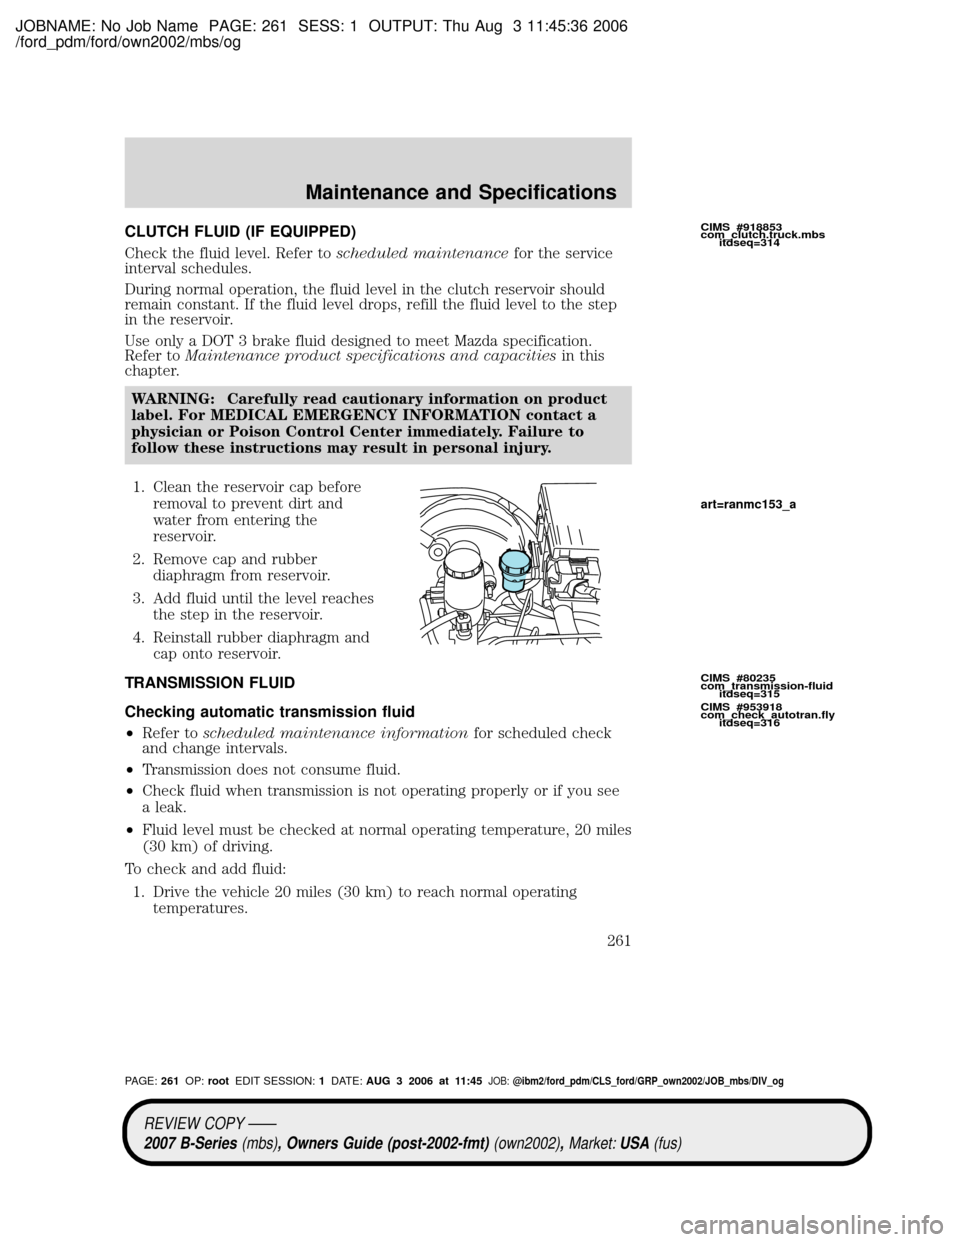 MAZDA MODEL B2300 TRUCK 2007   (in English) User Guide JOBNAME: No Job Name PAGE: 261 SESS: 1 OUTPUT: Thu Aug 3 11:45:36 2006
/ford_pdm/ford/own2002/mbs/og
CLUTCH FLUID (IF EQUIPPED)
Check the fluid level. Refer toscheduled maintenancefor the service
inte